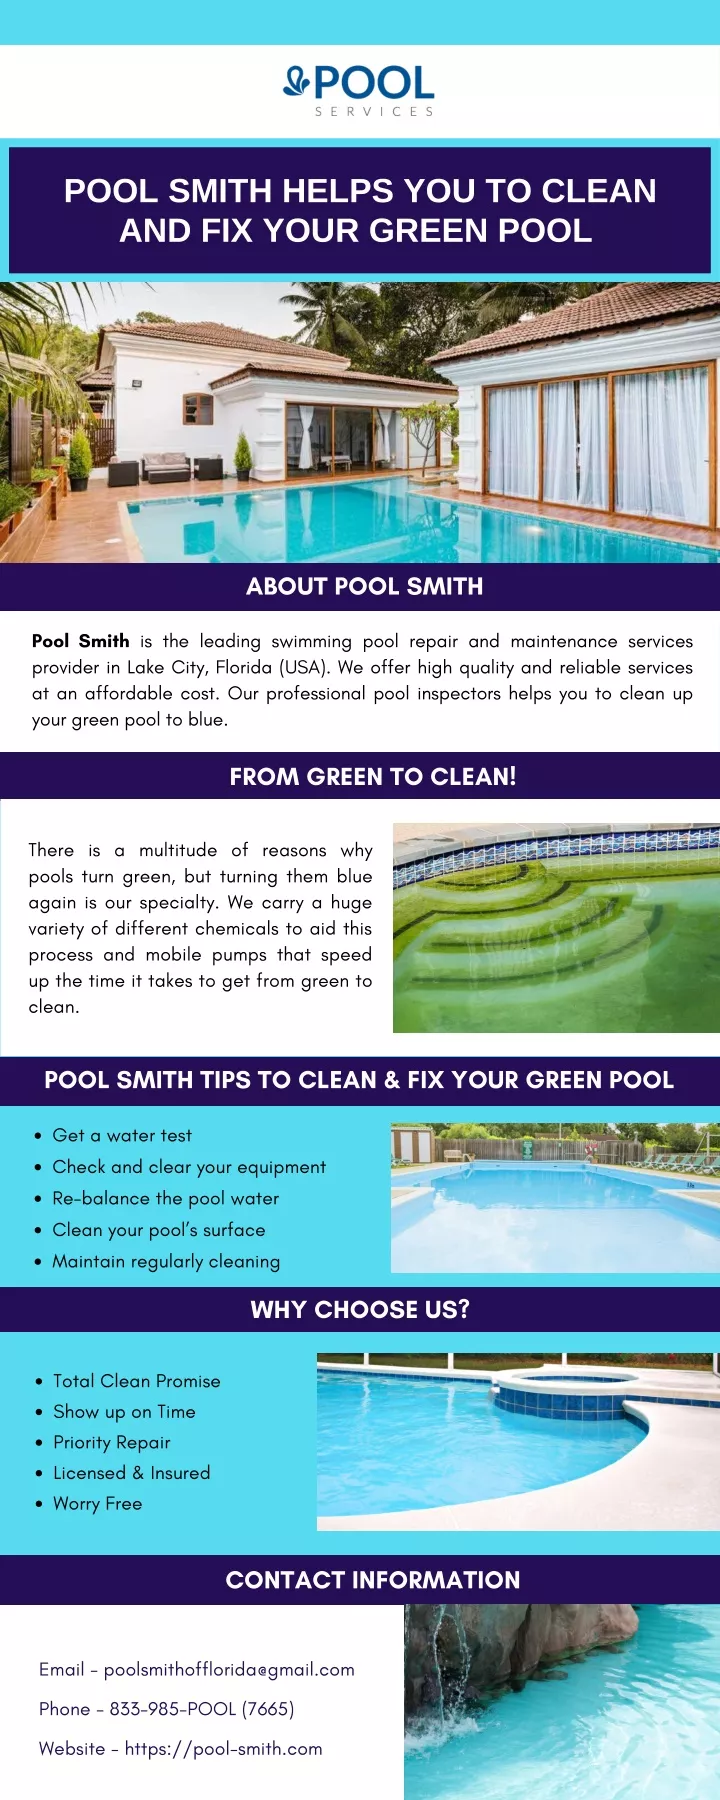 pool smith helps you to clean and fix your green